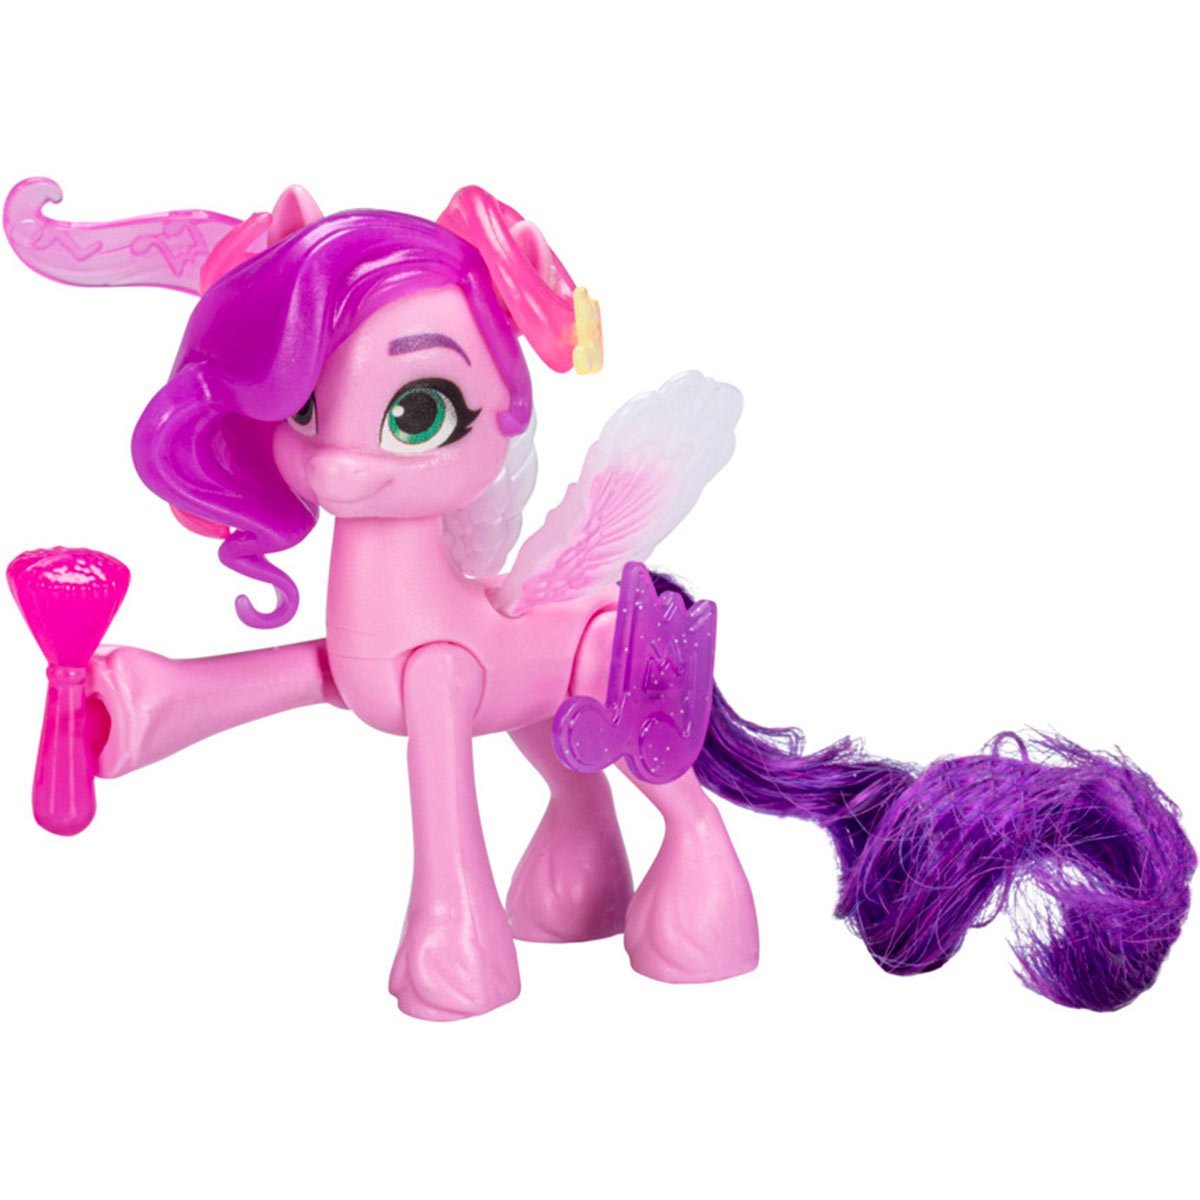 My Little Pony: A New Generation Movie Musical Star Princess Petals -  6-Inch Pony Toy that Plays Music for Kids 5 and Up - My Little Pony